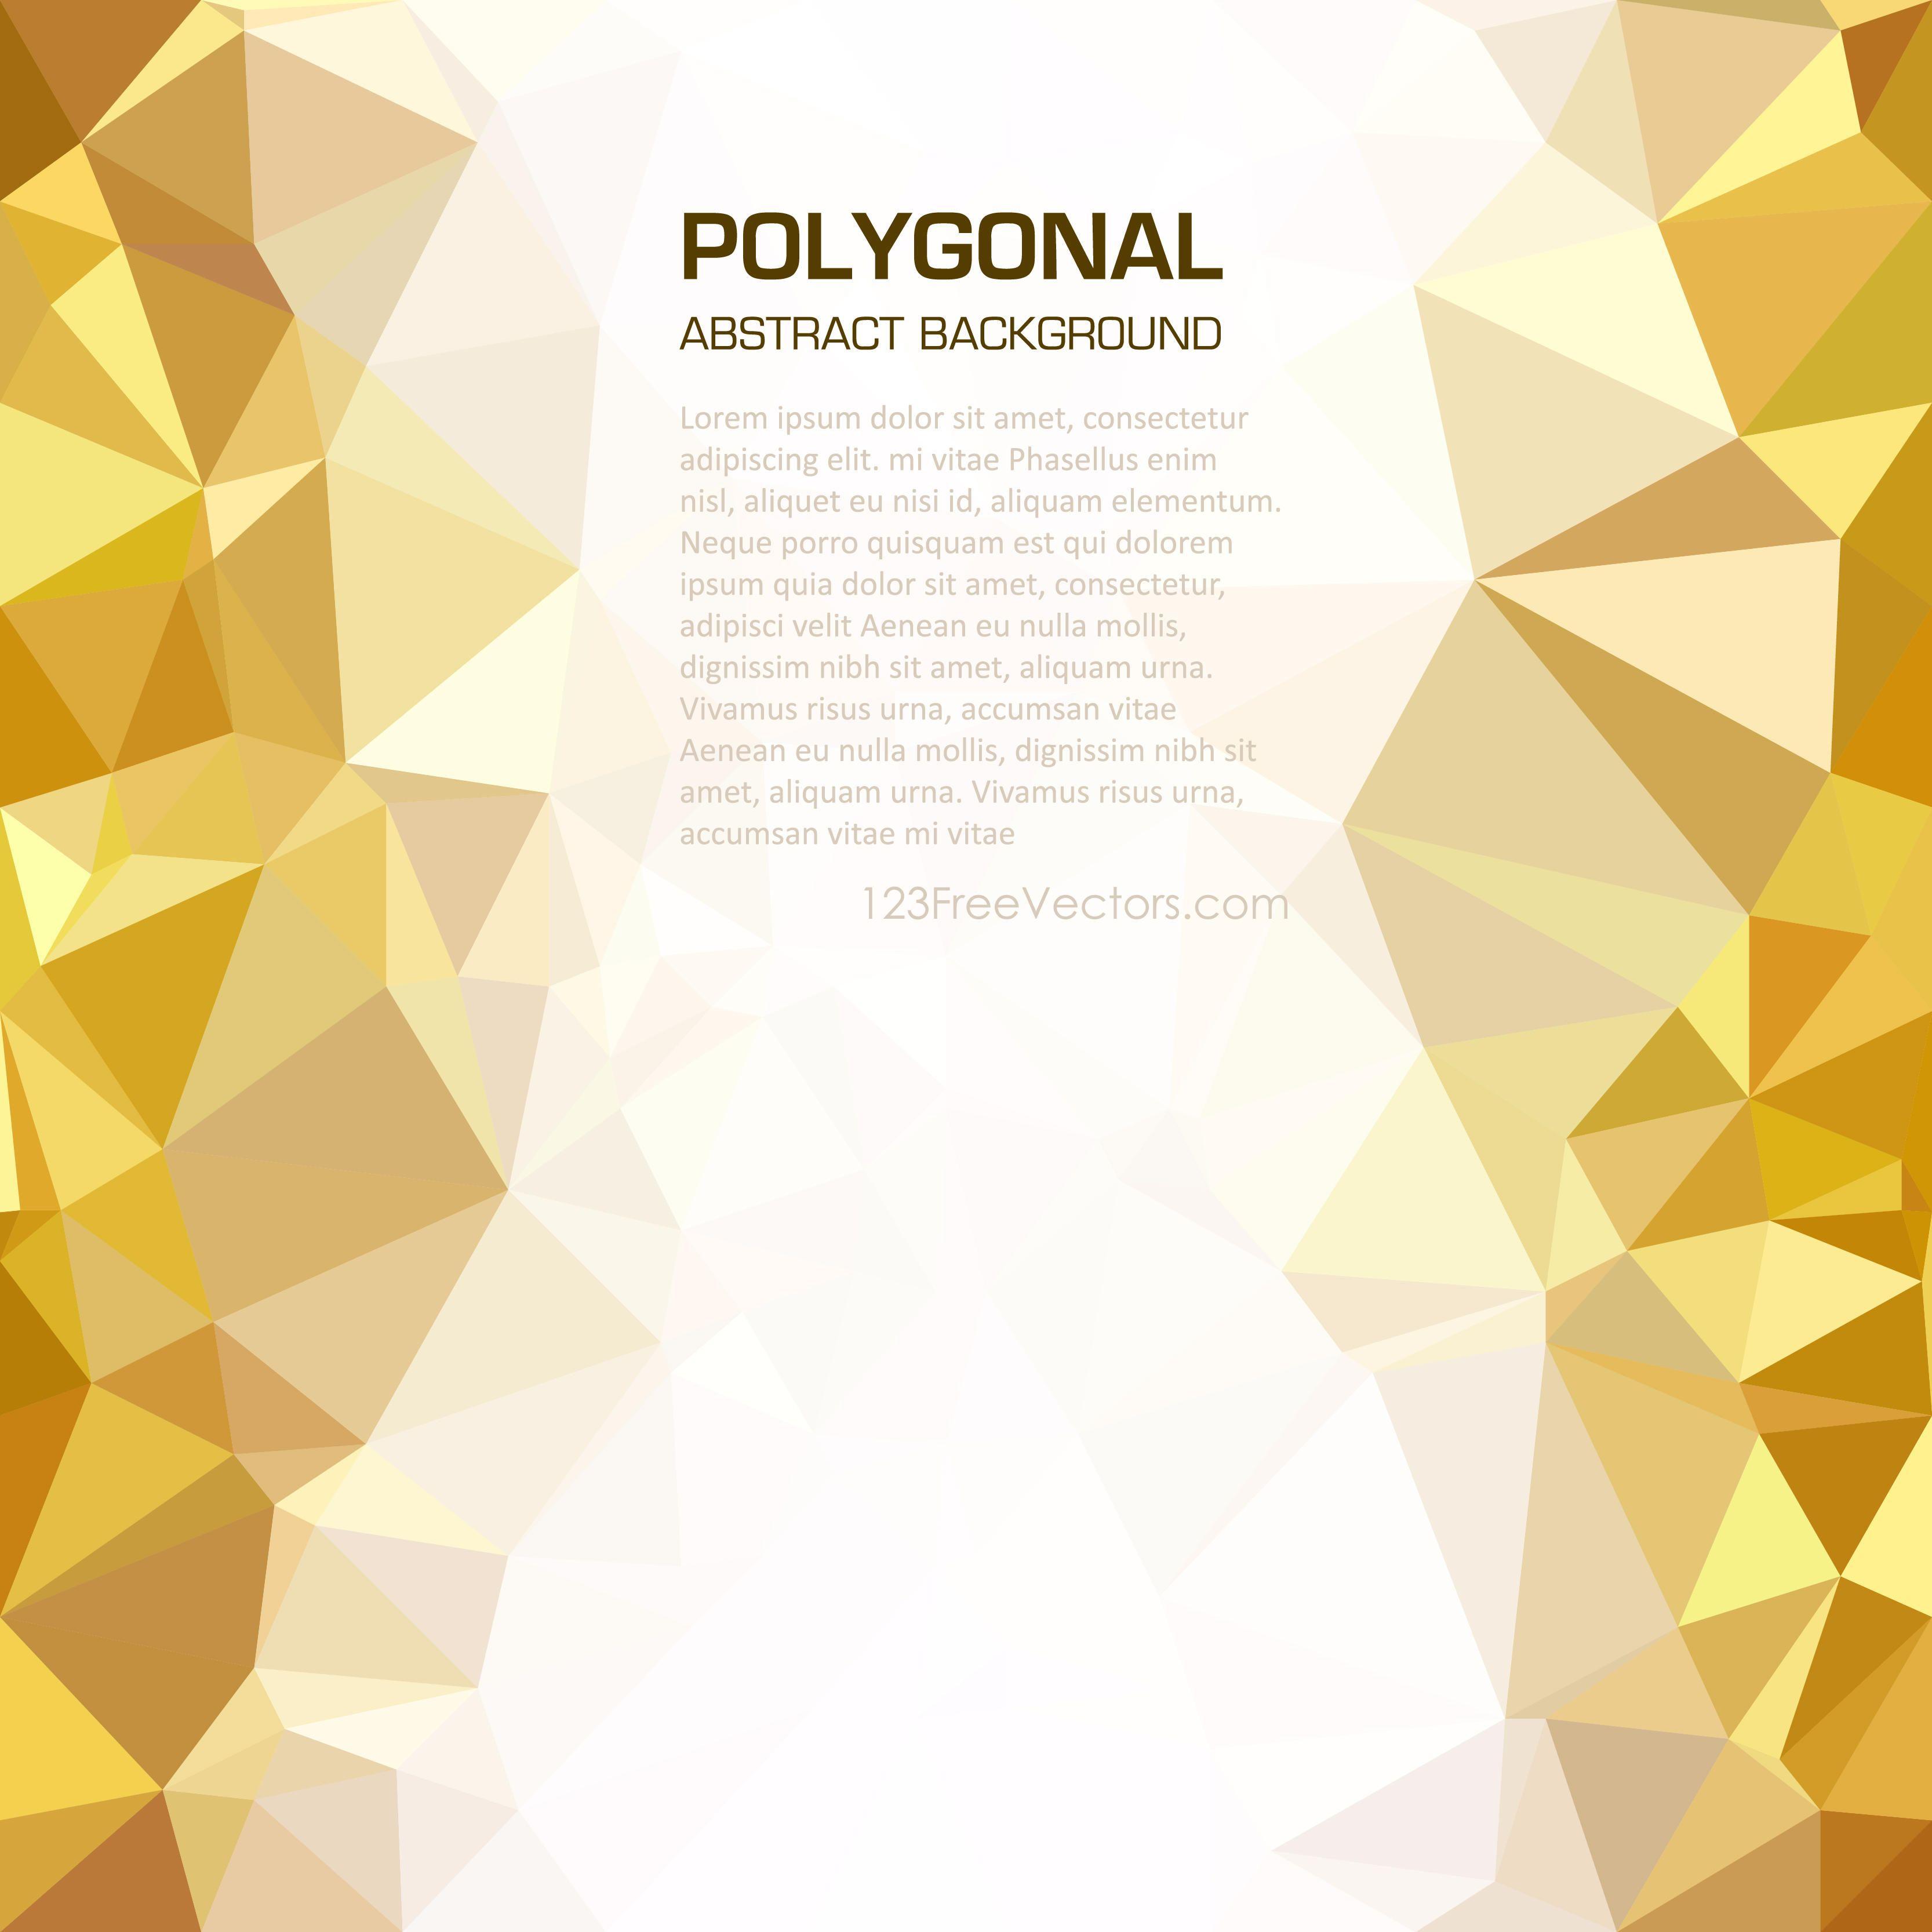 Light Golden Low Poly Background ImageFreevectors